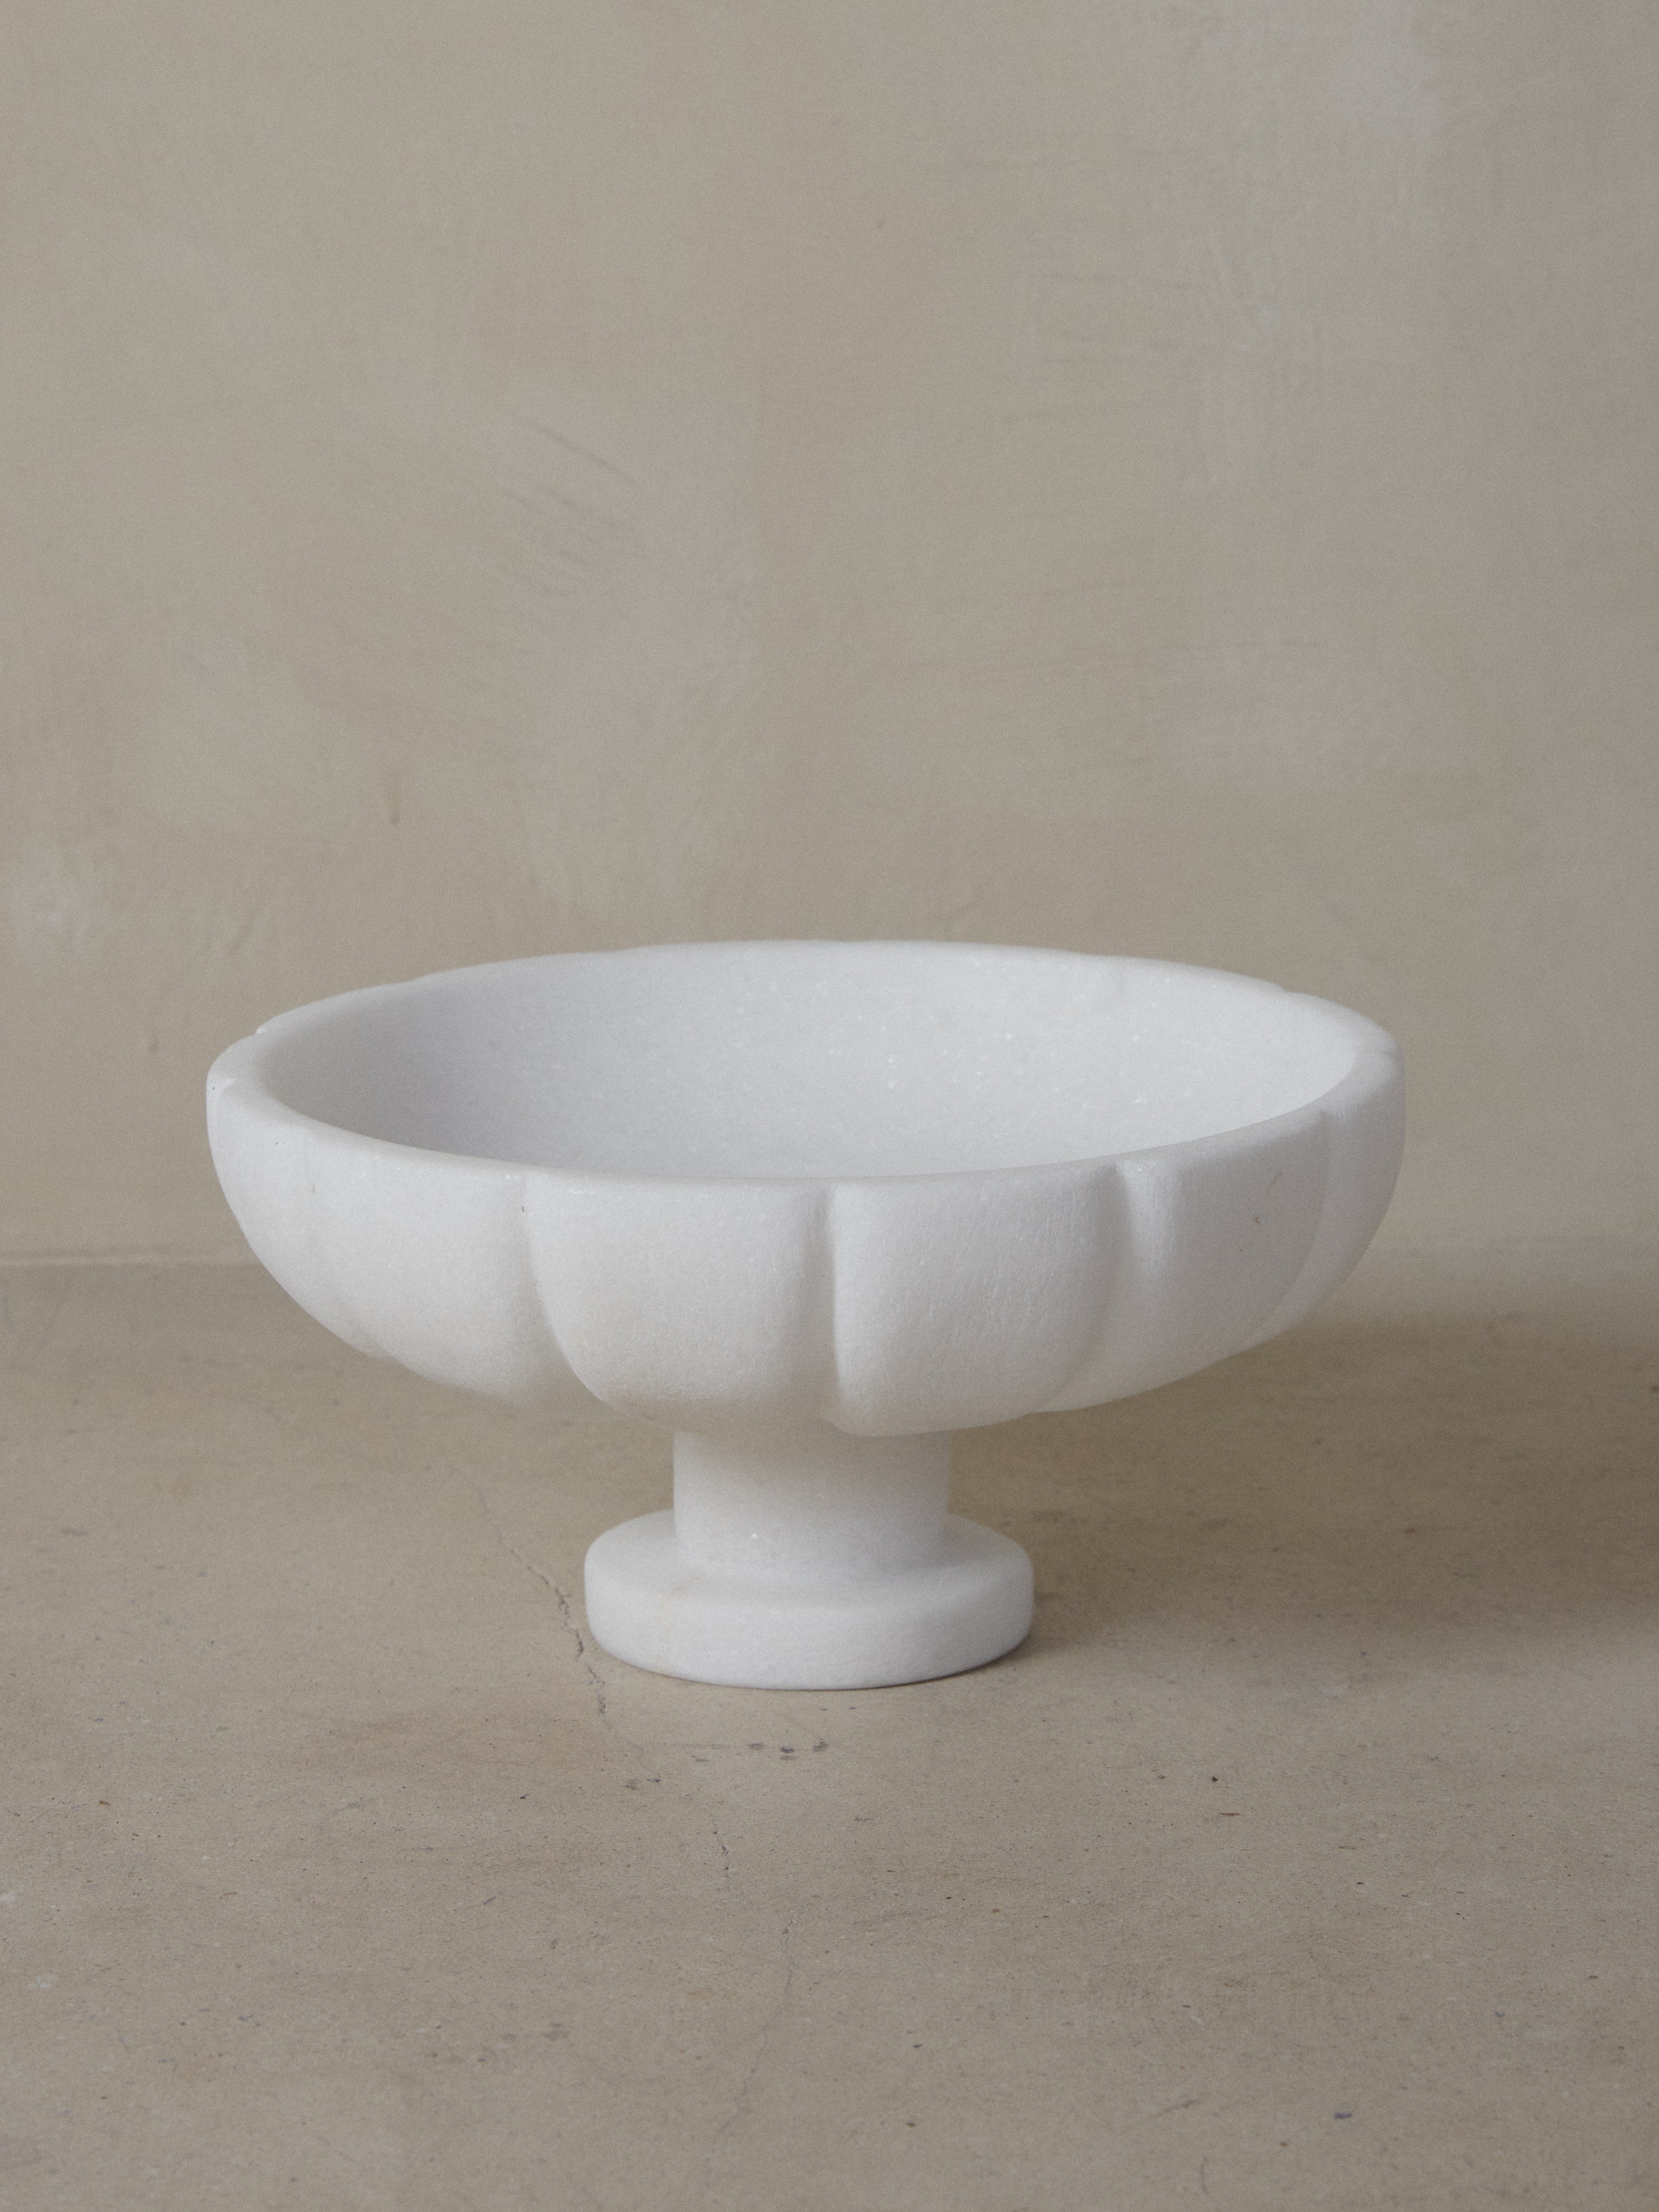 Crystalline Naxian marble hand sculpted into an oversized, round footed bowl with smooth interior and elegantly carved paneled exterior.